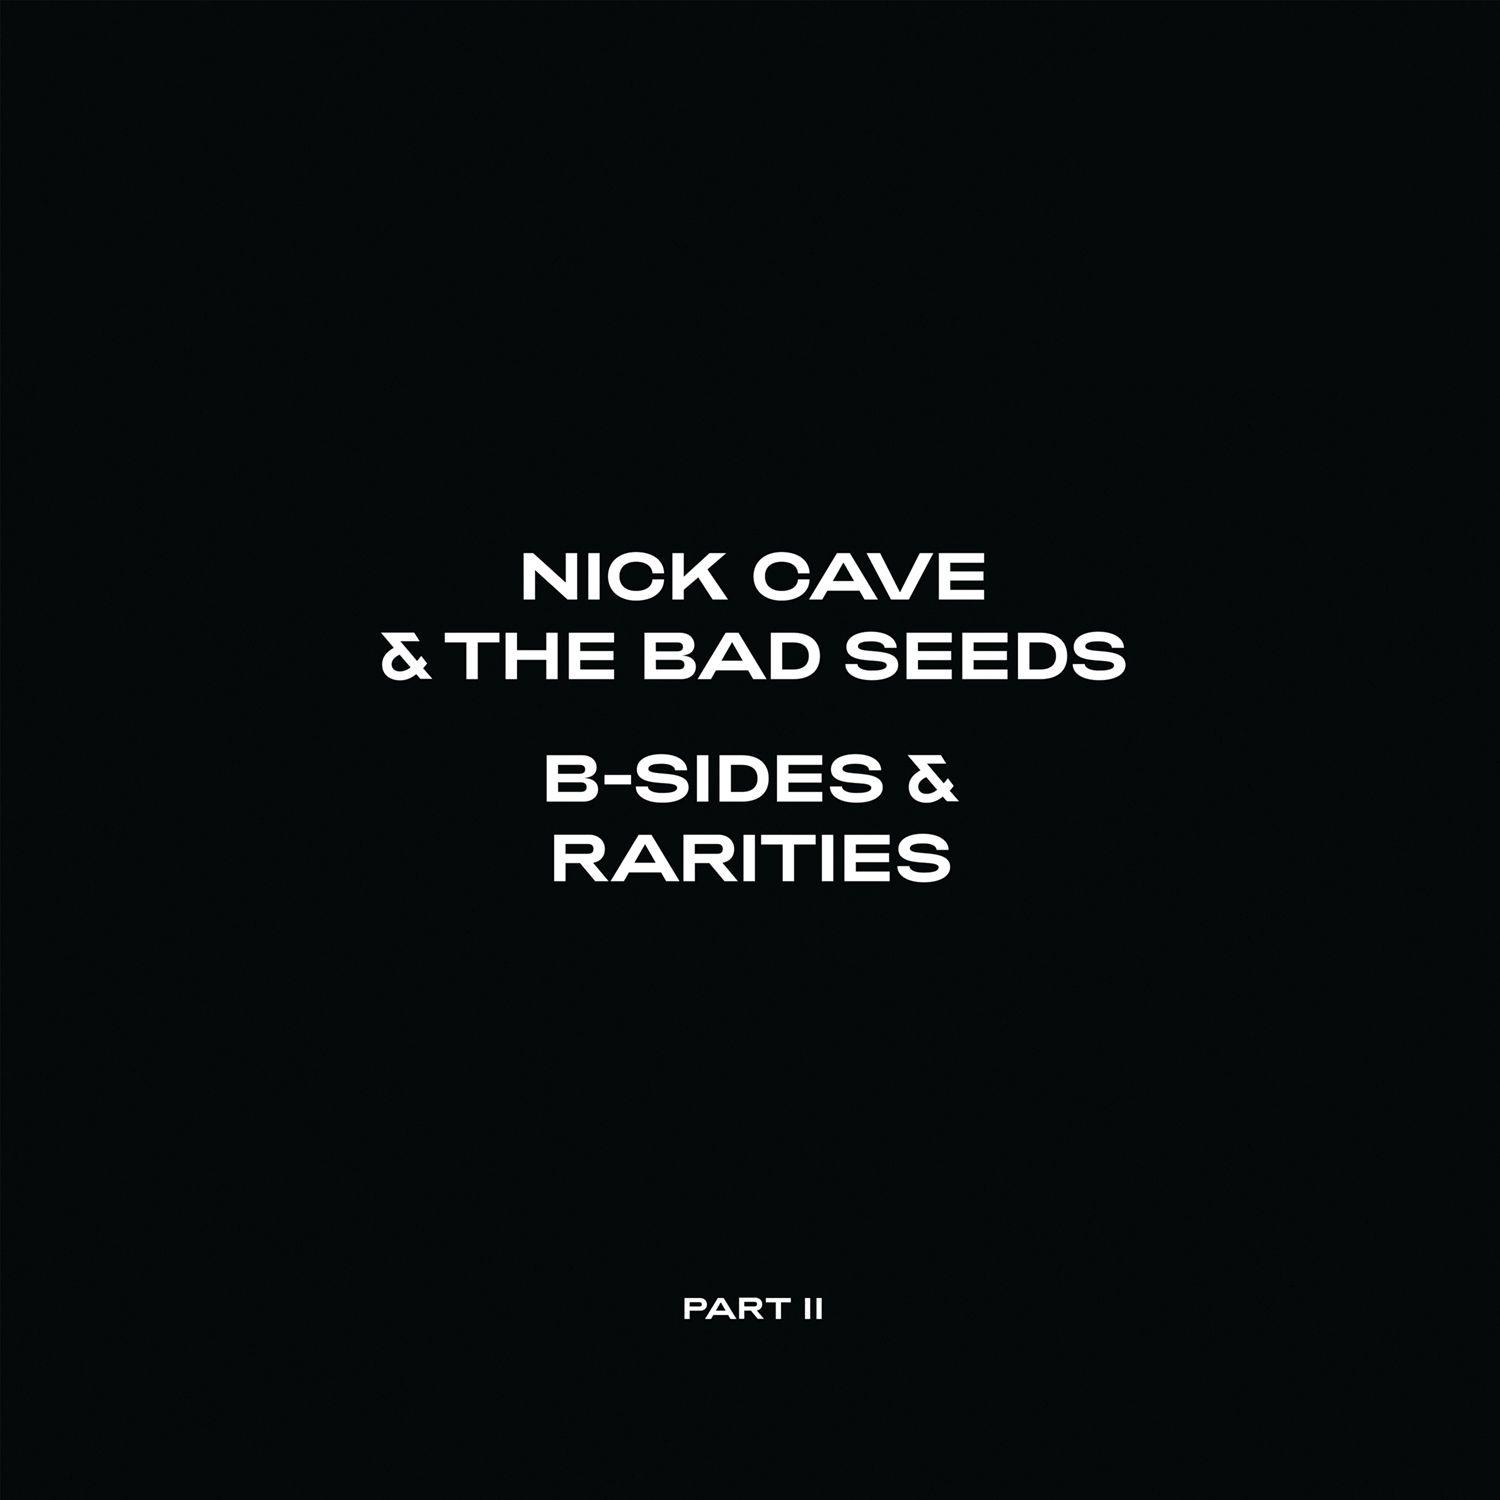 II) Seeds Rarities (CD) Cave - Nick Bad And And (Part - B-Sides The